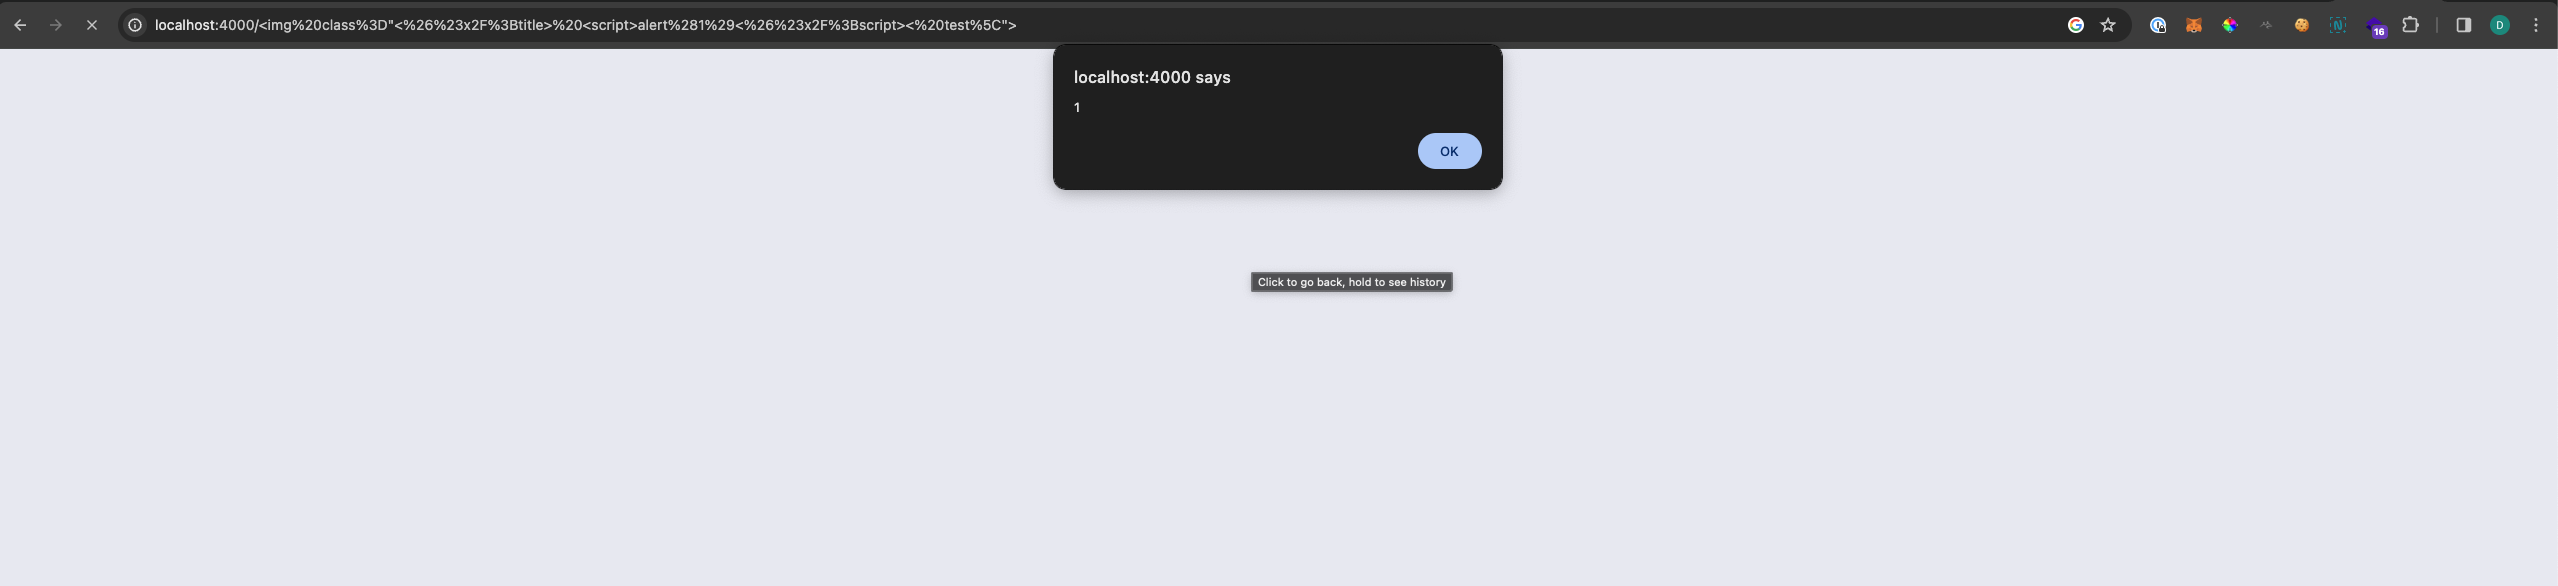 Test XSS payload